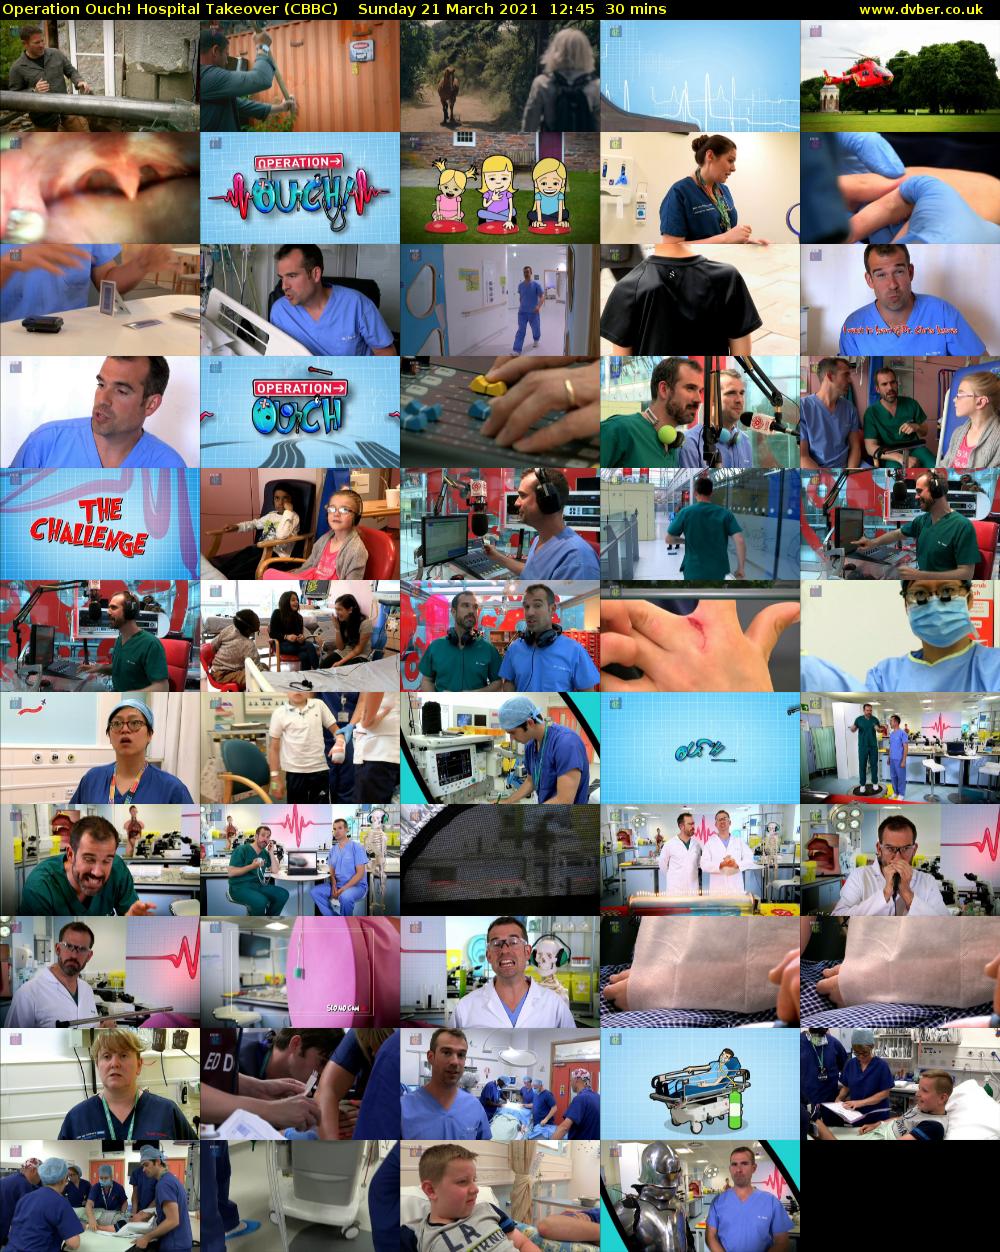 Operation Ouch! Hospital Takeover (CBBC) Sunday 21 March 2021 12:45 - 13:15